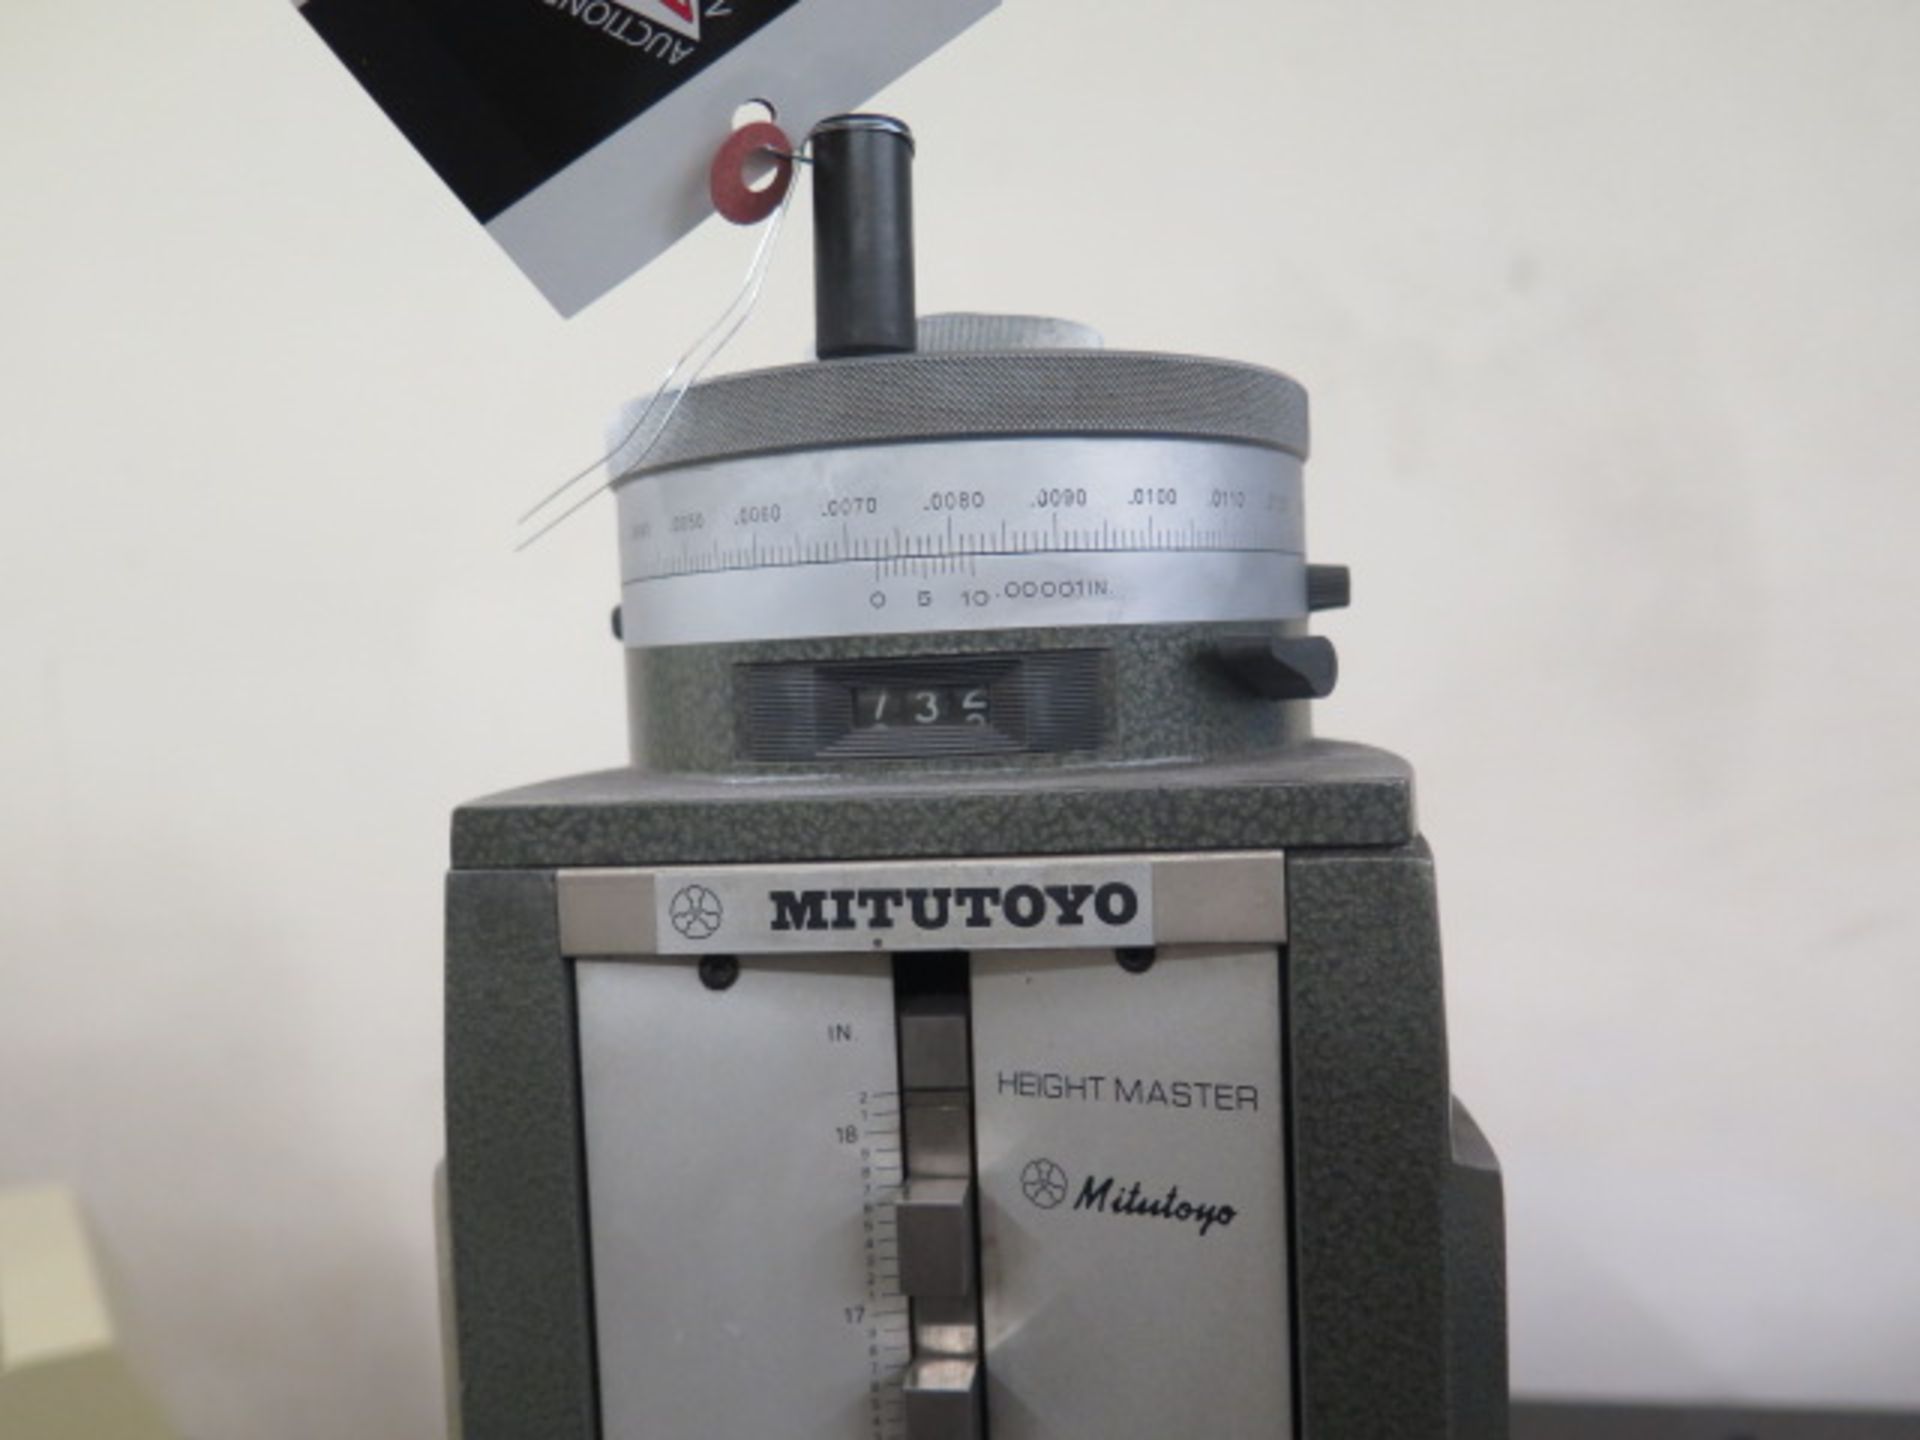 Mitutoyo 18" Height Master (SOLD AS-IS - NO WARRANTY) - Image 4 of 5